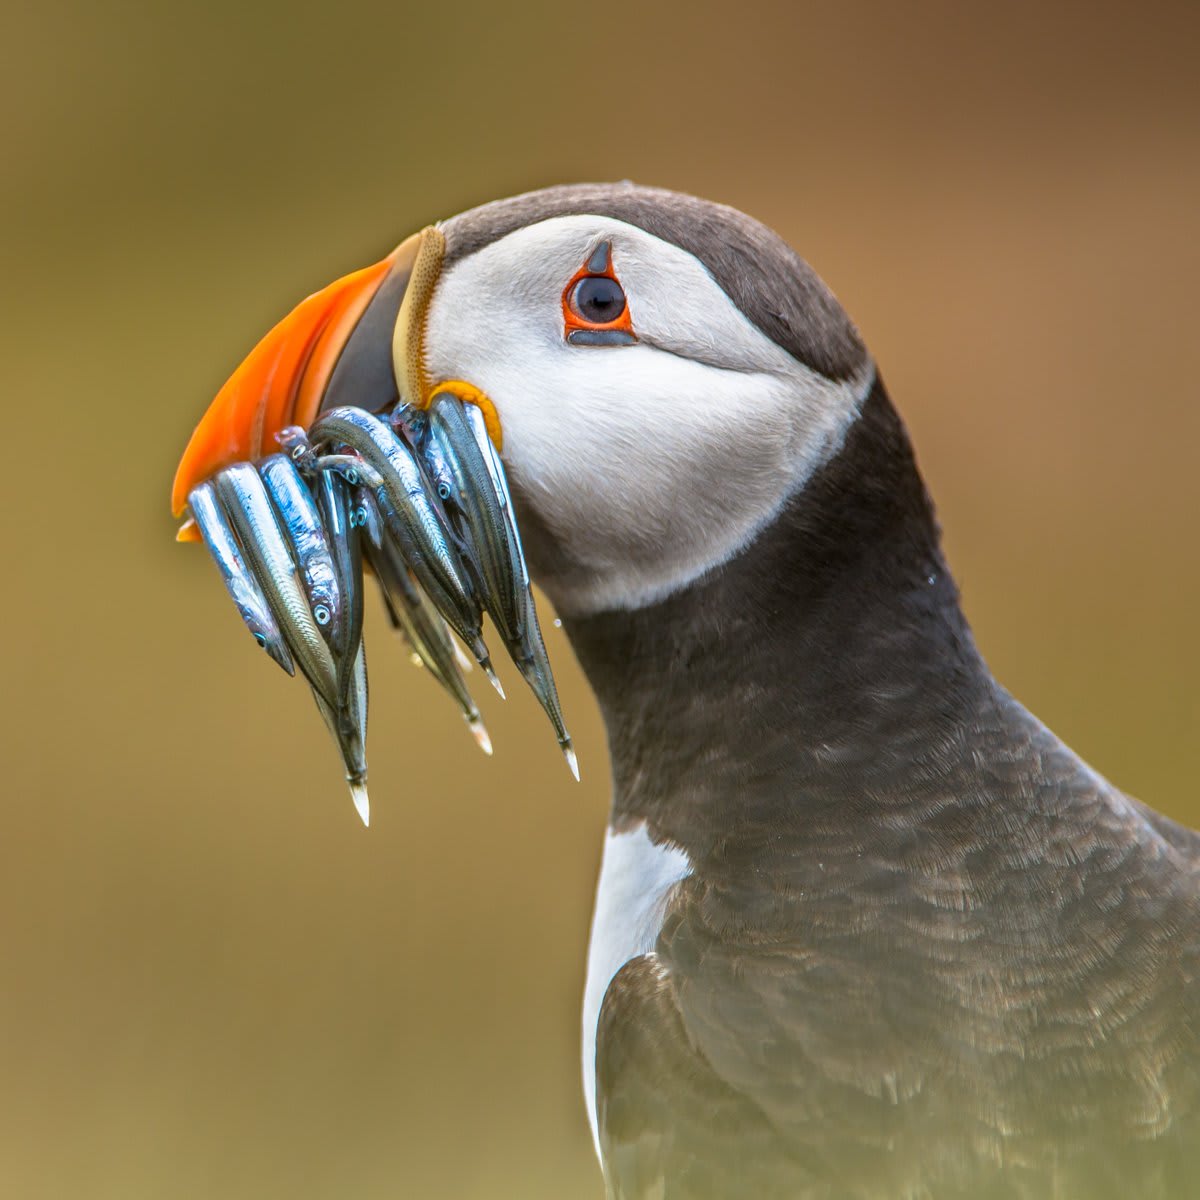 An entire beak full! Puffins feed almost exclusively on fish, and sandeels make for the perfect snack.